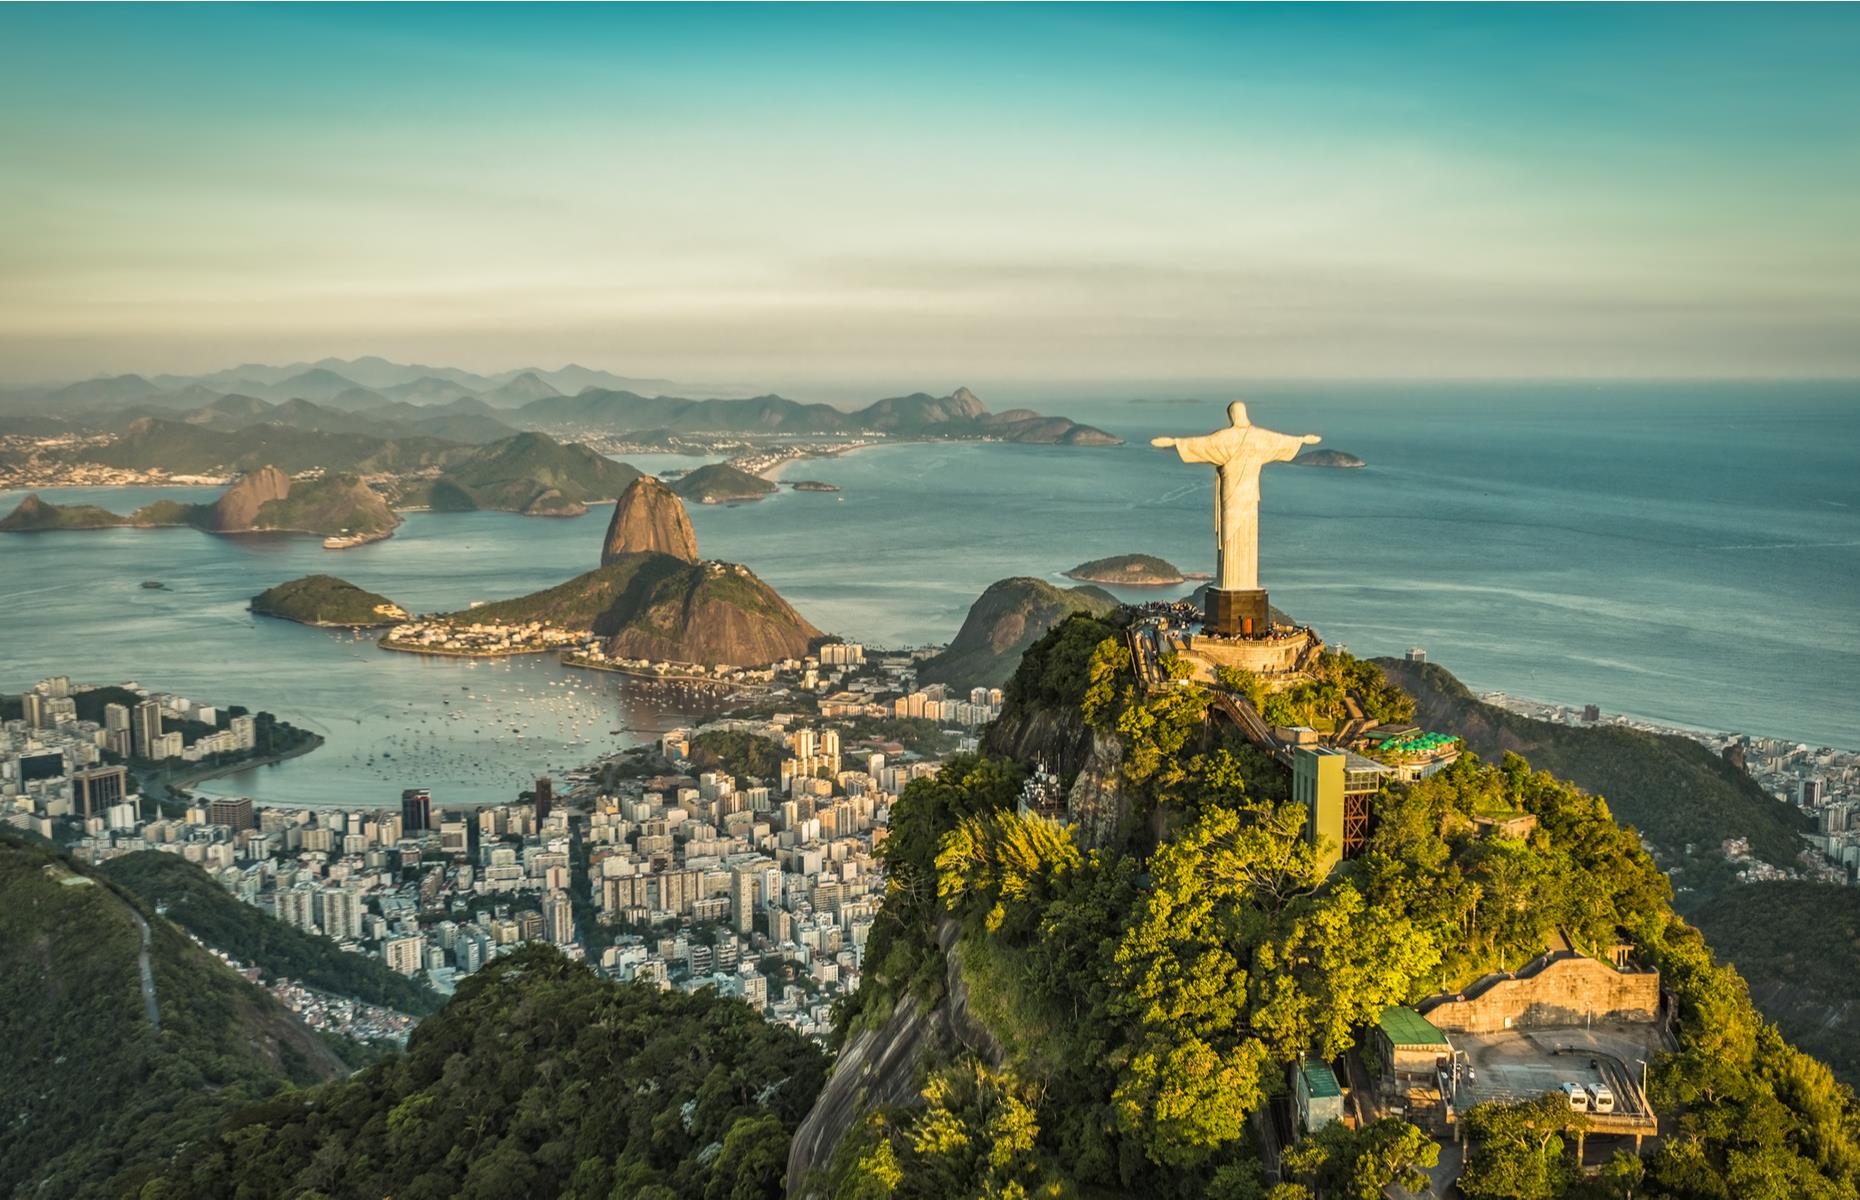 <p>With sweeping views taking in the striking Christ the Redeemer statue and a multitude of tiny islands dotted around, Guanabara Bay separates <a href="https://www.loveexploring.com/guides/90367/explore-rio-de-janeiro-what-to-see-do-where-to-stay-and-what-to-eat">Rio de Janeiro</a> on the southwest and Niterói on the southeast. At the entrance to the bay are the popular beaches of Copacabana and Ipanema, while the awe-inspiring Sugarloaf Mountain juts out on a peninsula on its southwestern side. </p>